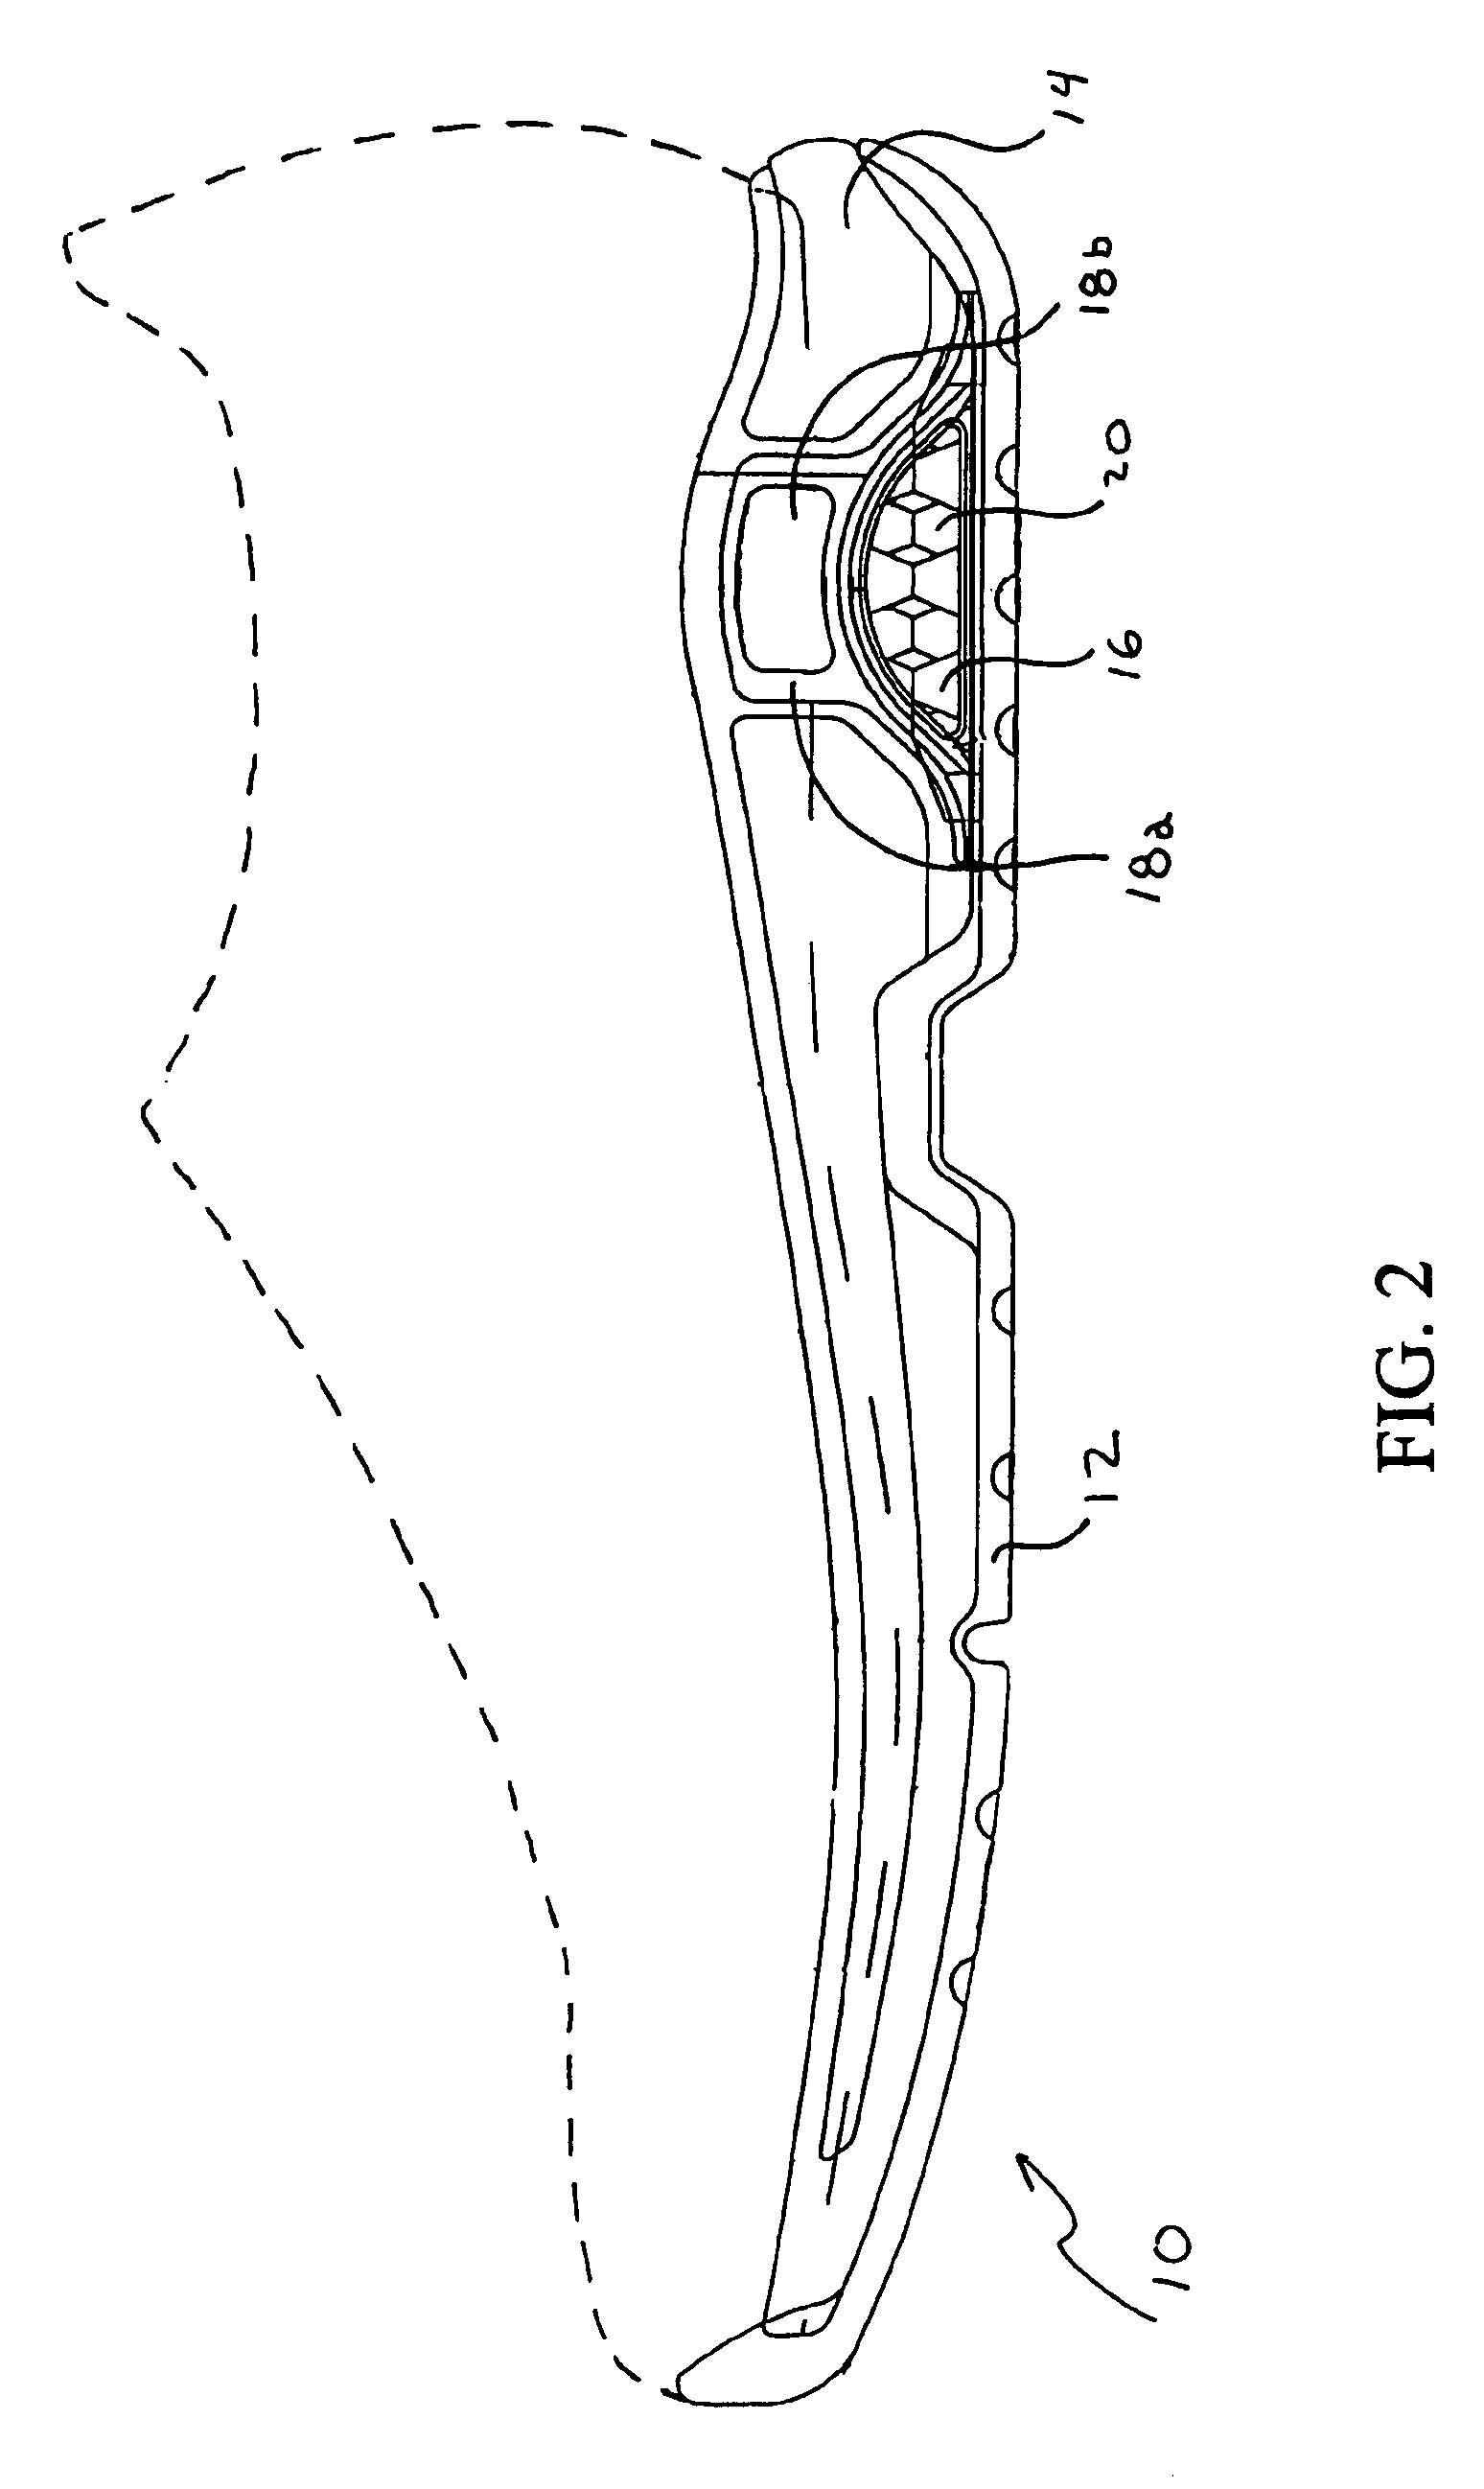 Cushioning assembly in an athletic shoe